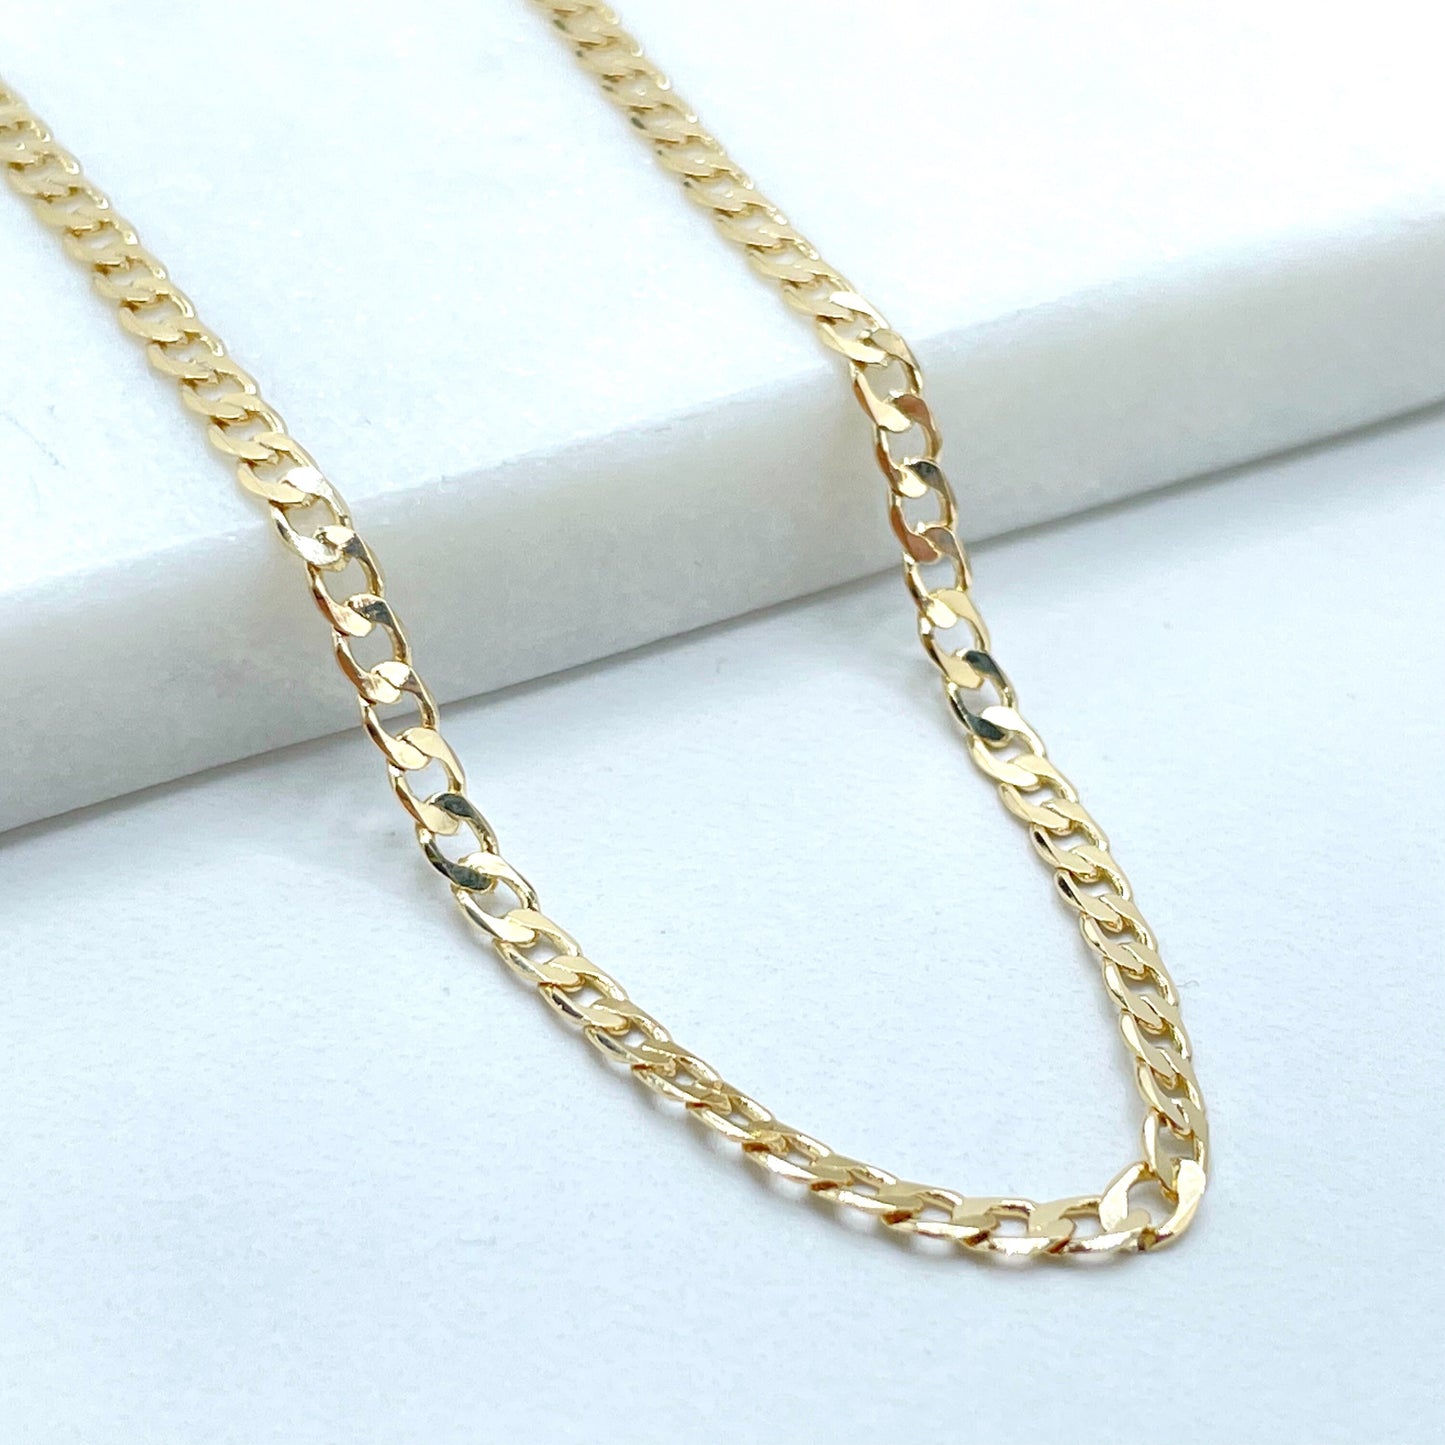 18k Gold Filled Cuban Link Chain 3mm Thickness, 16, 18, 20, 22 or 24 inches of length, Unisex Curb Link, Wholesale Jewelry Making Supplies